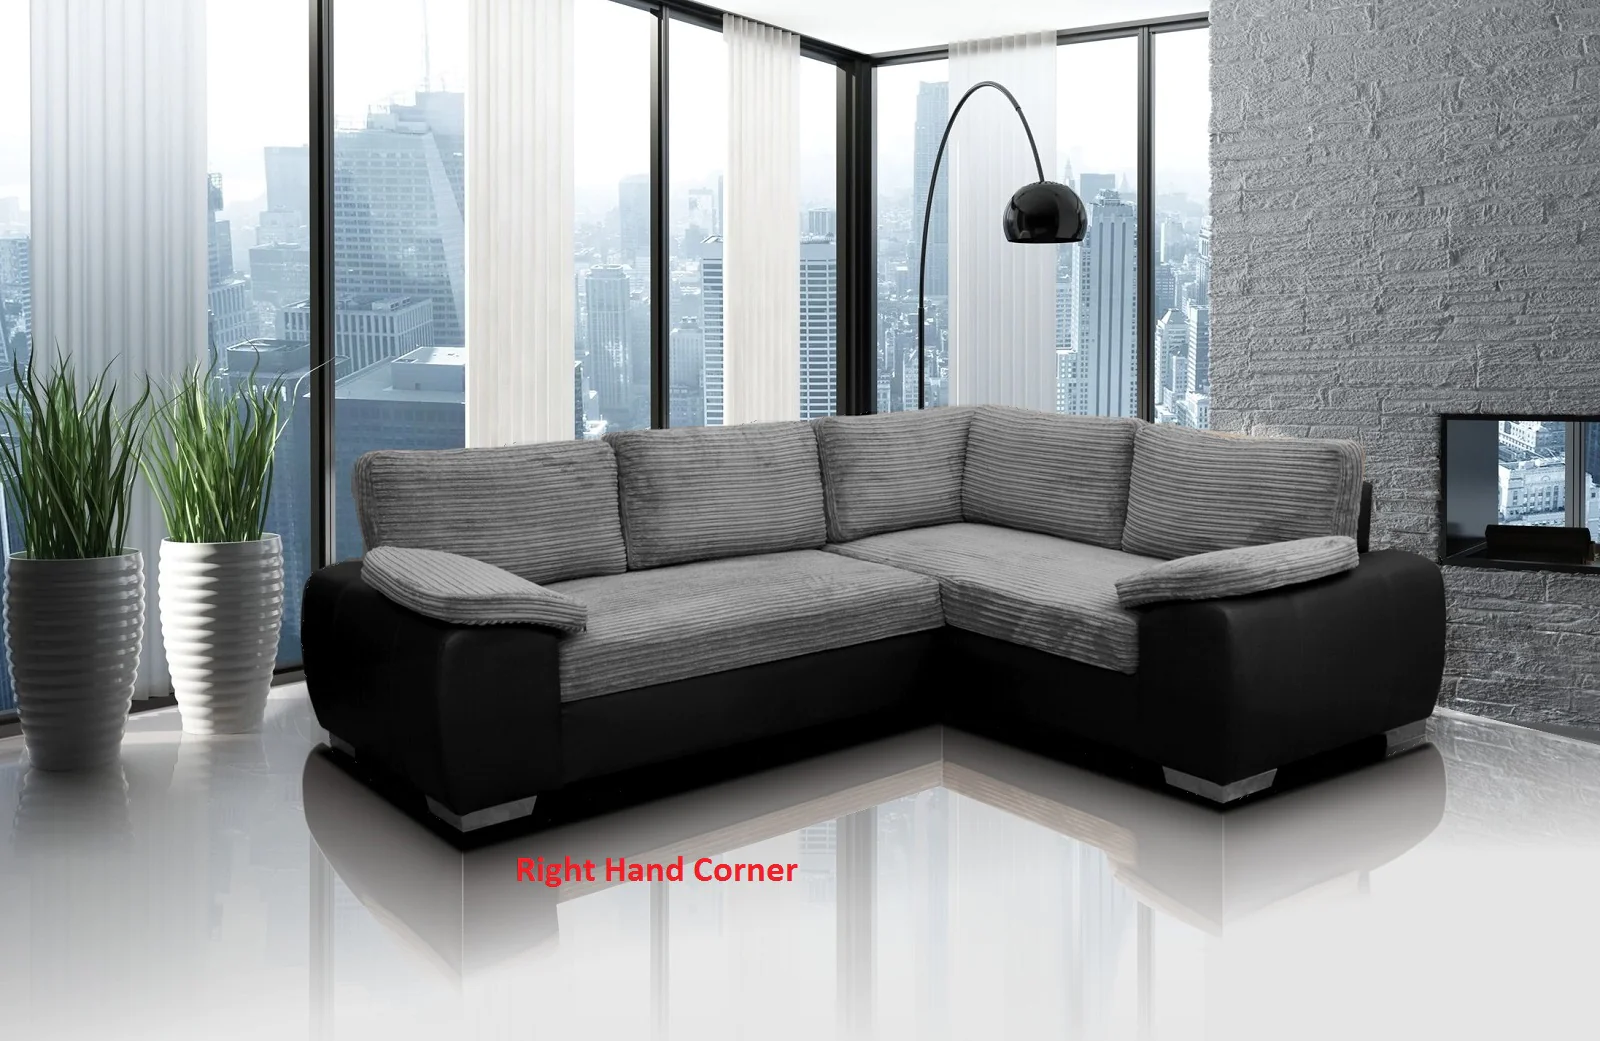 What are the considerations when choosing a sofa bed for the living room